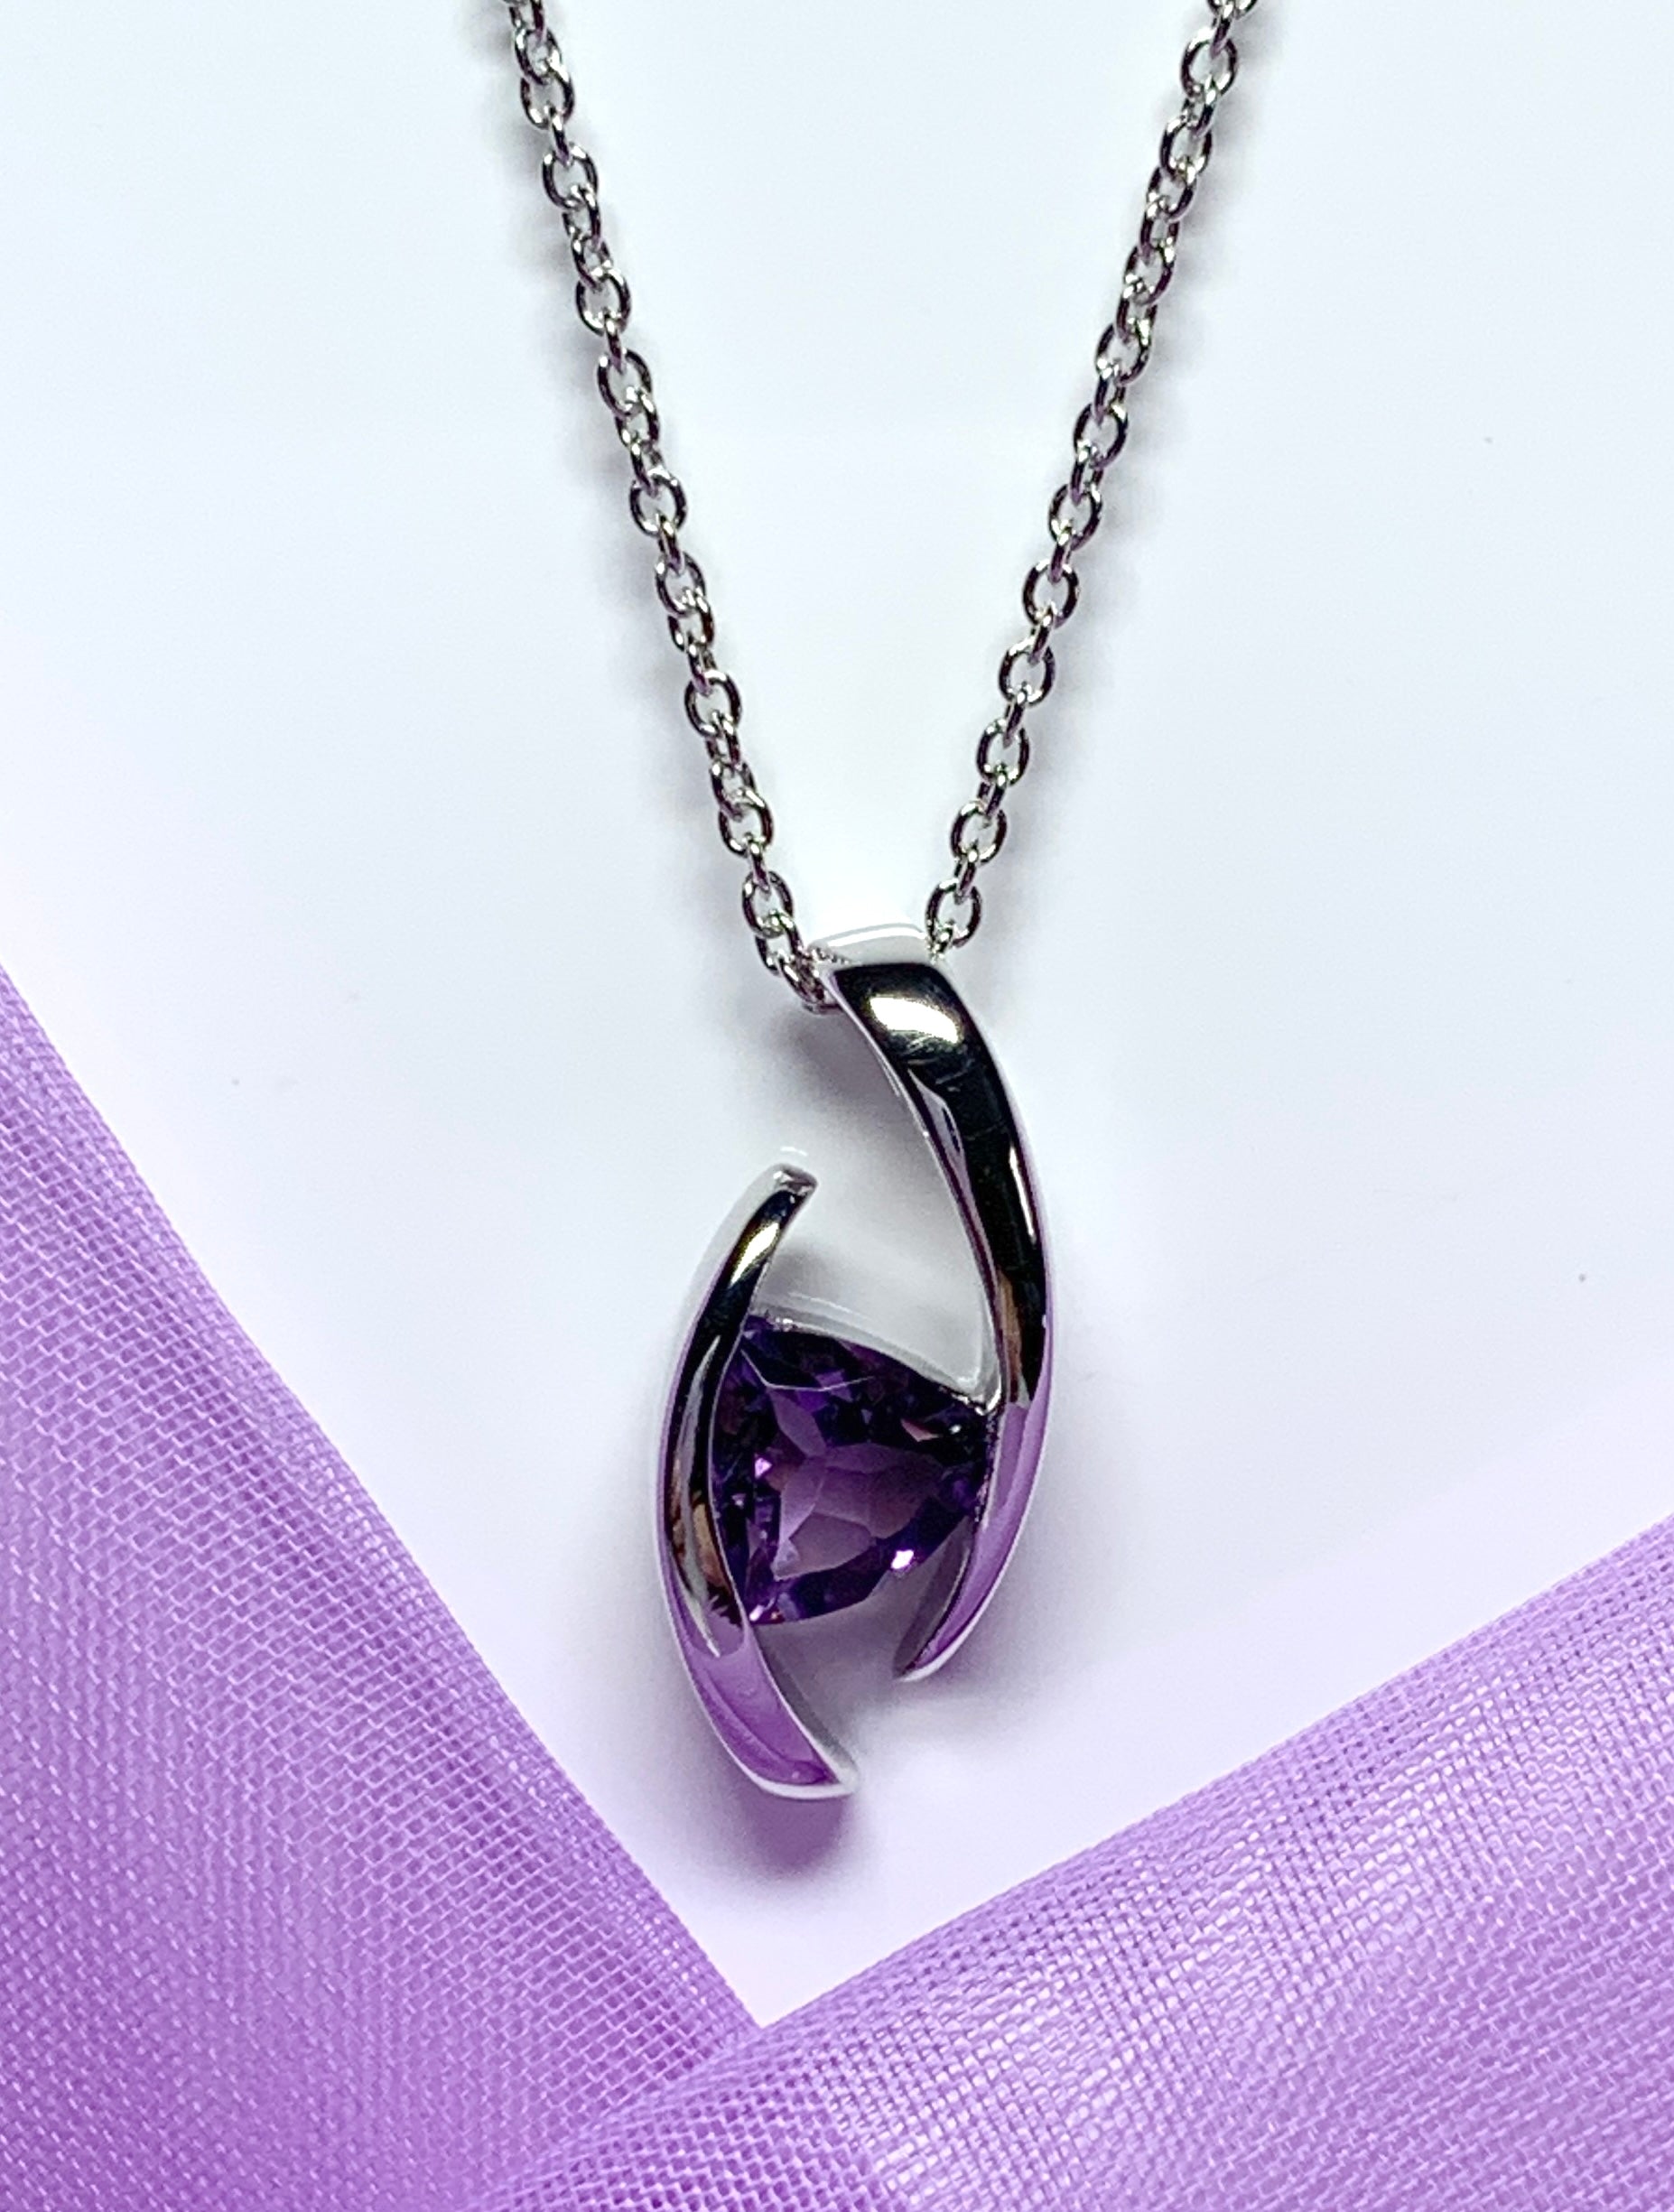 Real purple amethyst necklace pendant triangle smooth rubbed over setting